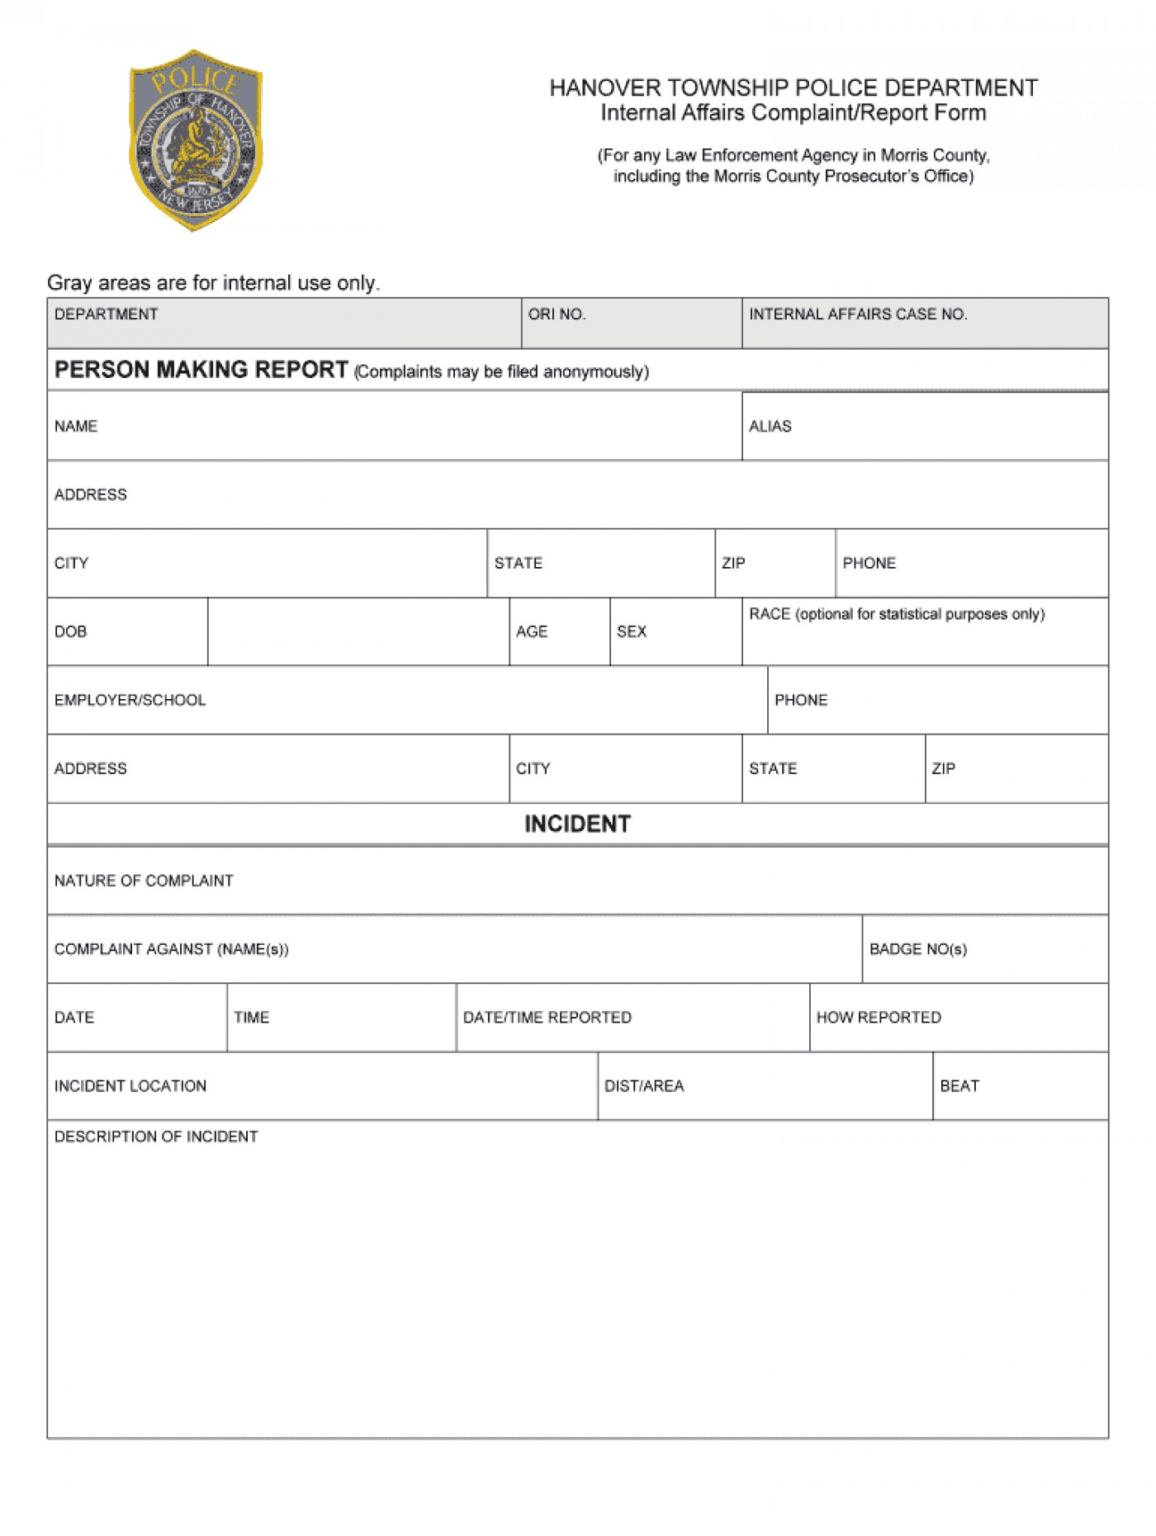 001 Blank Police Report Template Large Fantastic Ideas Free With Blank 